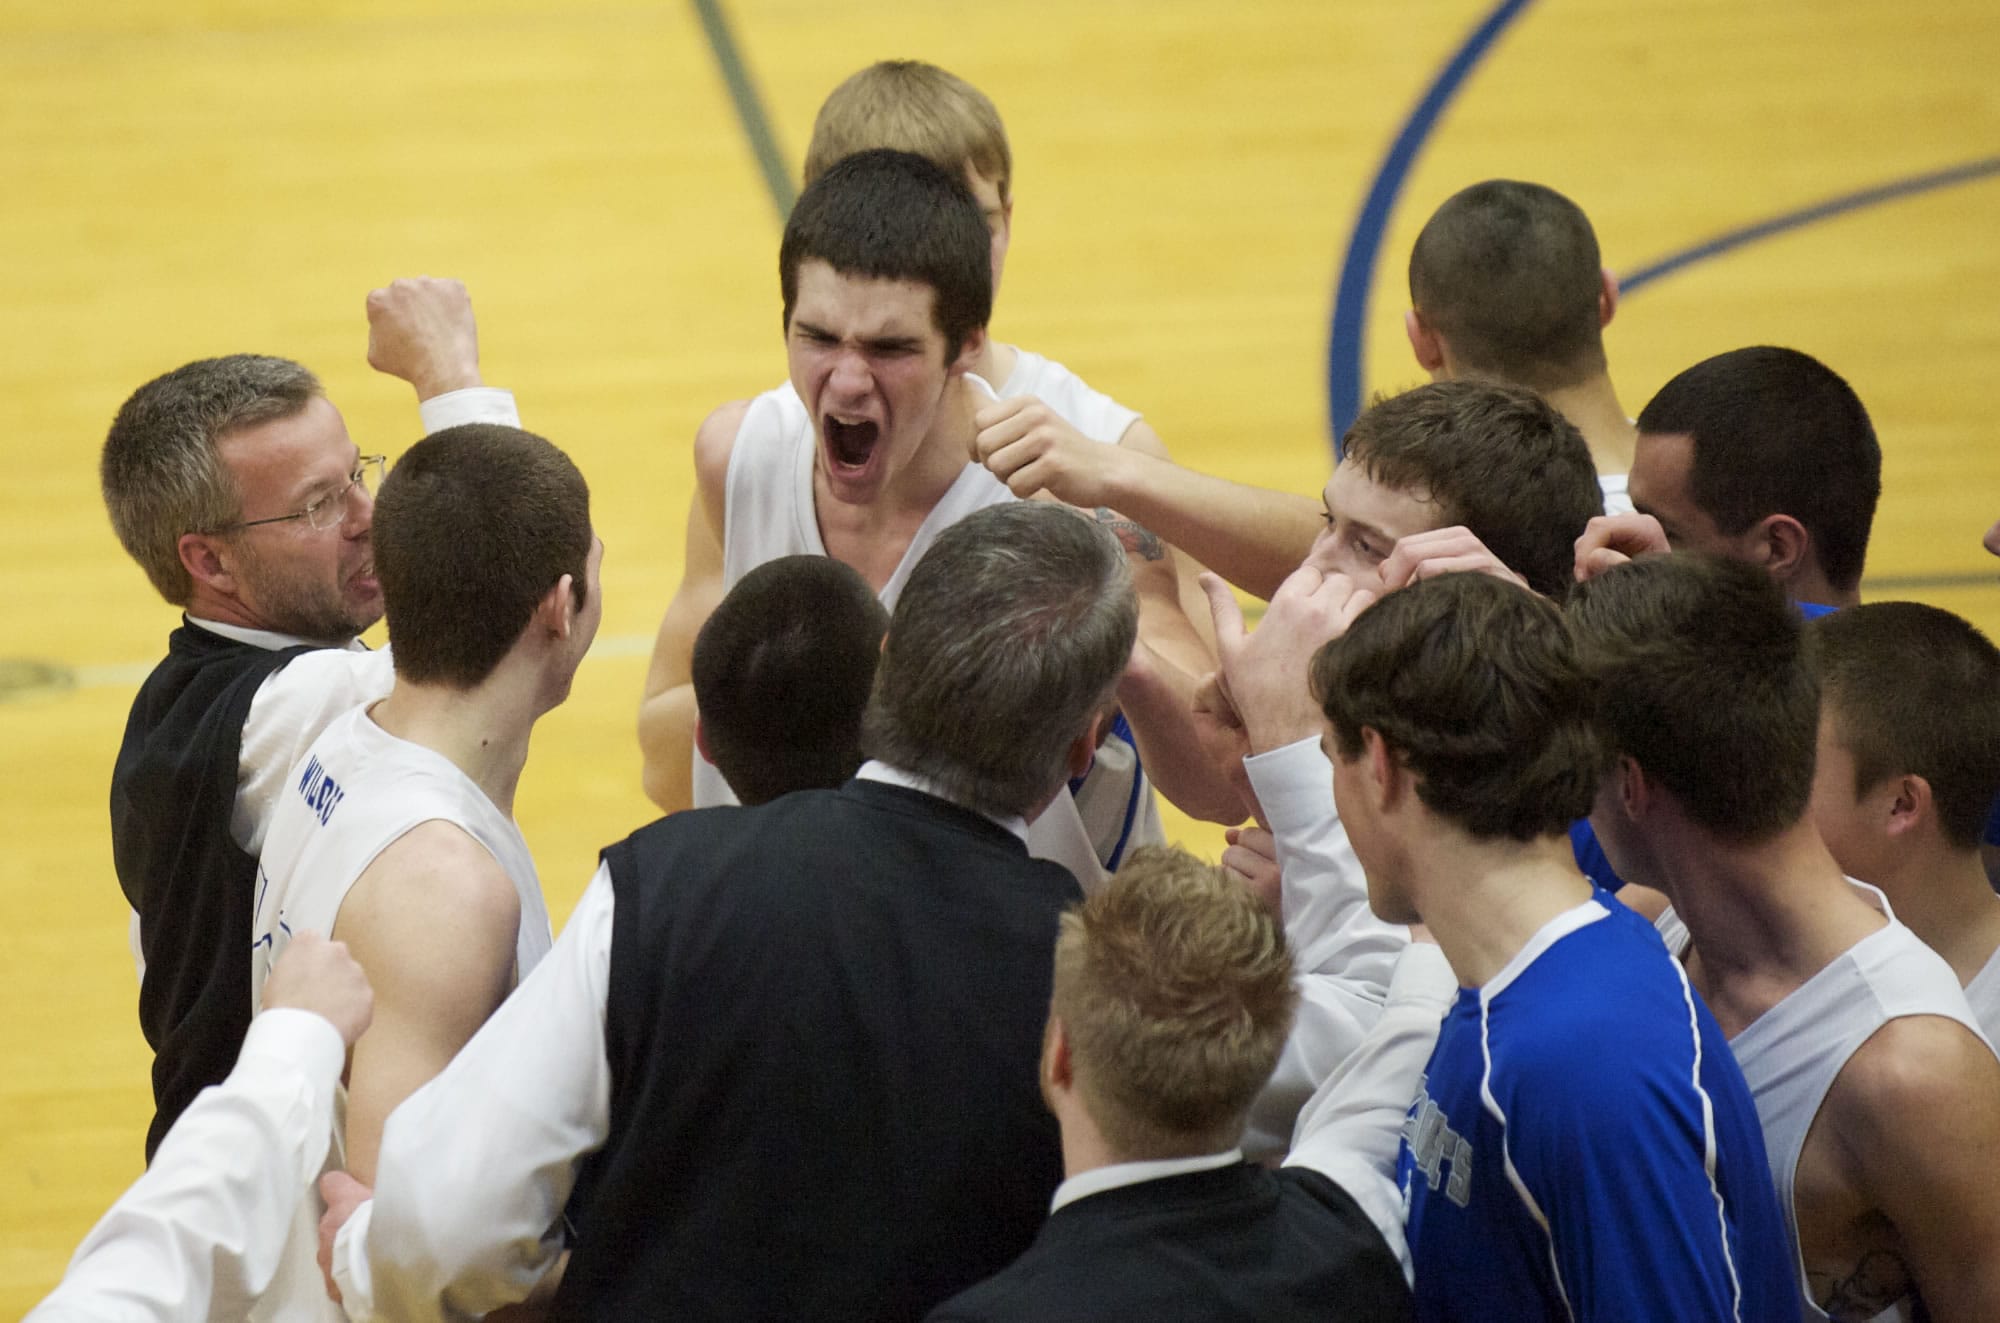 La Center's Austin Meyers celebrates with his team after beating Woodland at the boys 1A District Tournament at Kelso High School, Wednesday, February 13, 2013.